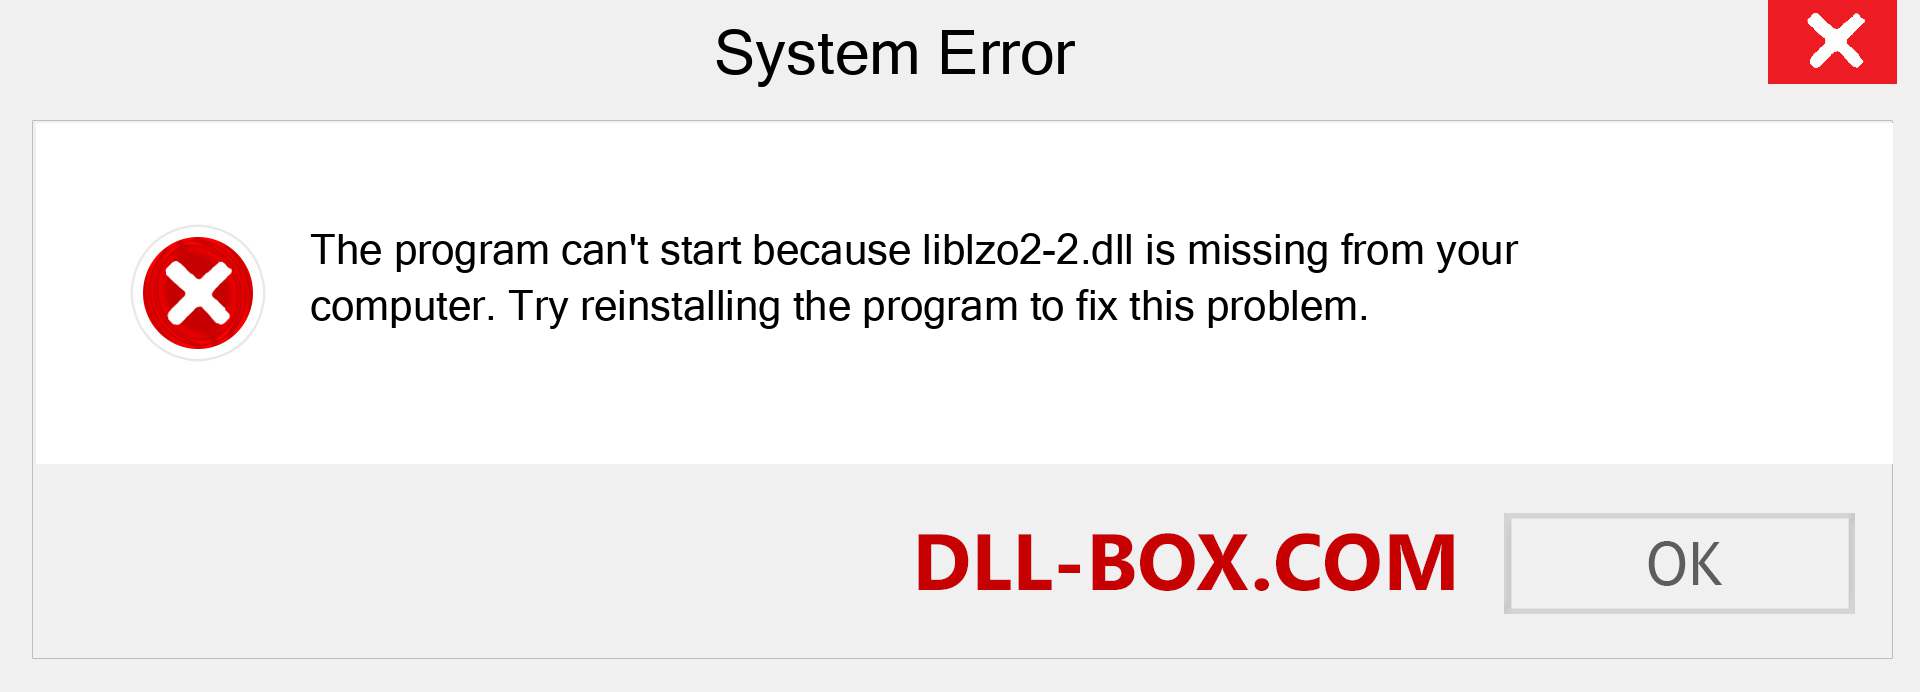  liblzo2-2.dll file is missing?. Download for Windows 7, 8, 10 - Fix  liblzo2-2 dll Missing Error on Windows, photos, images